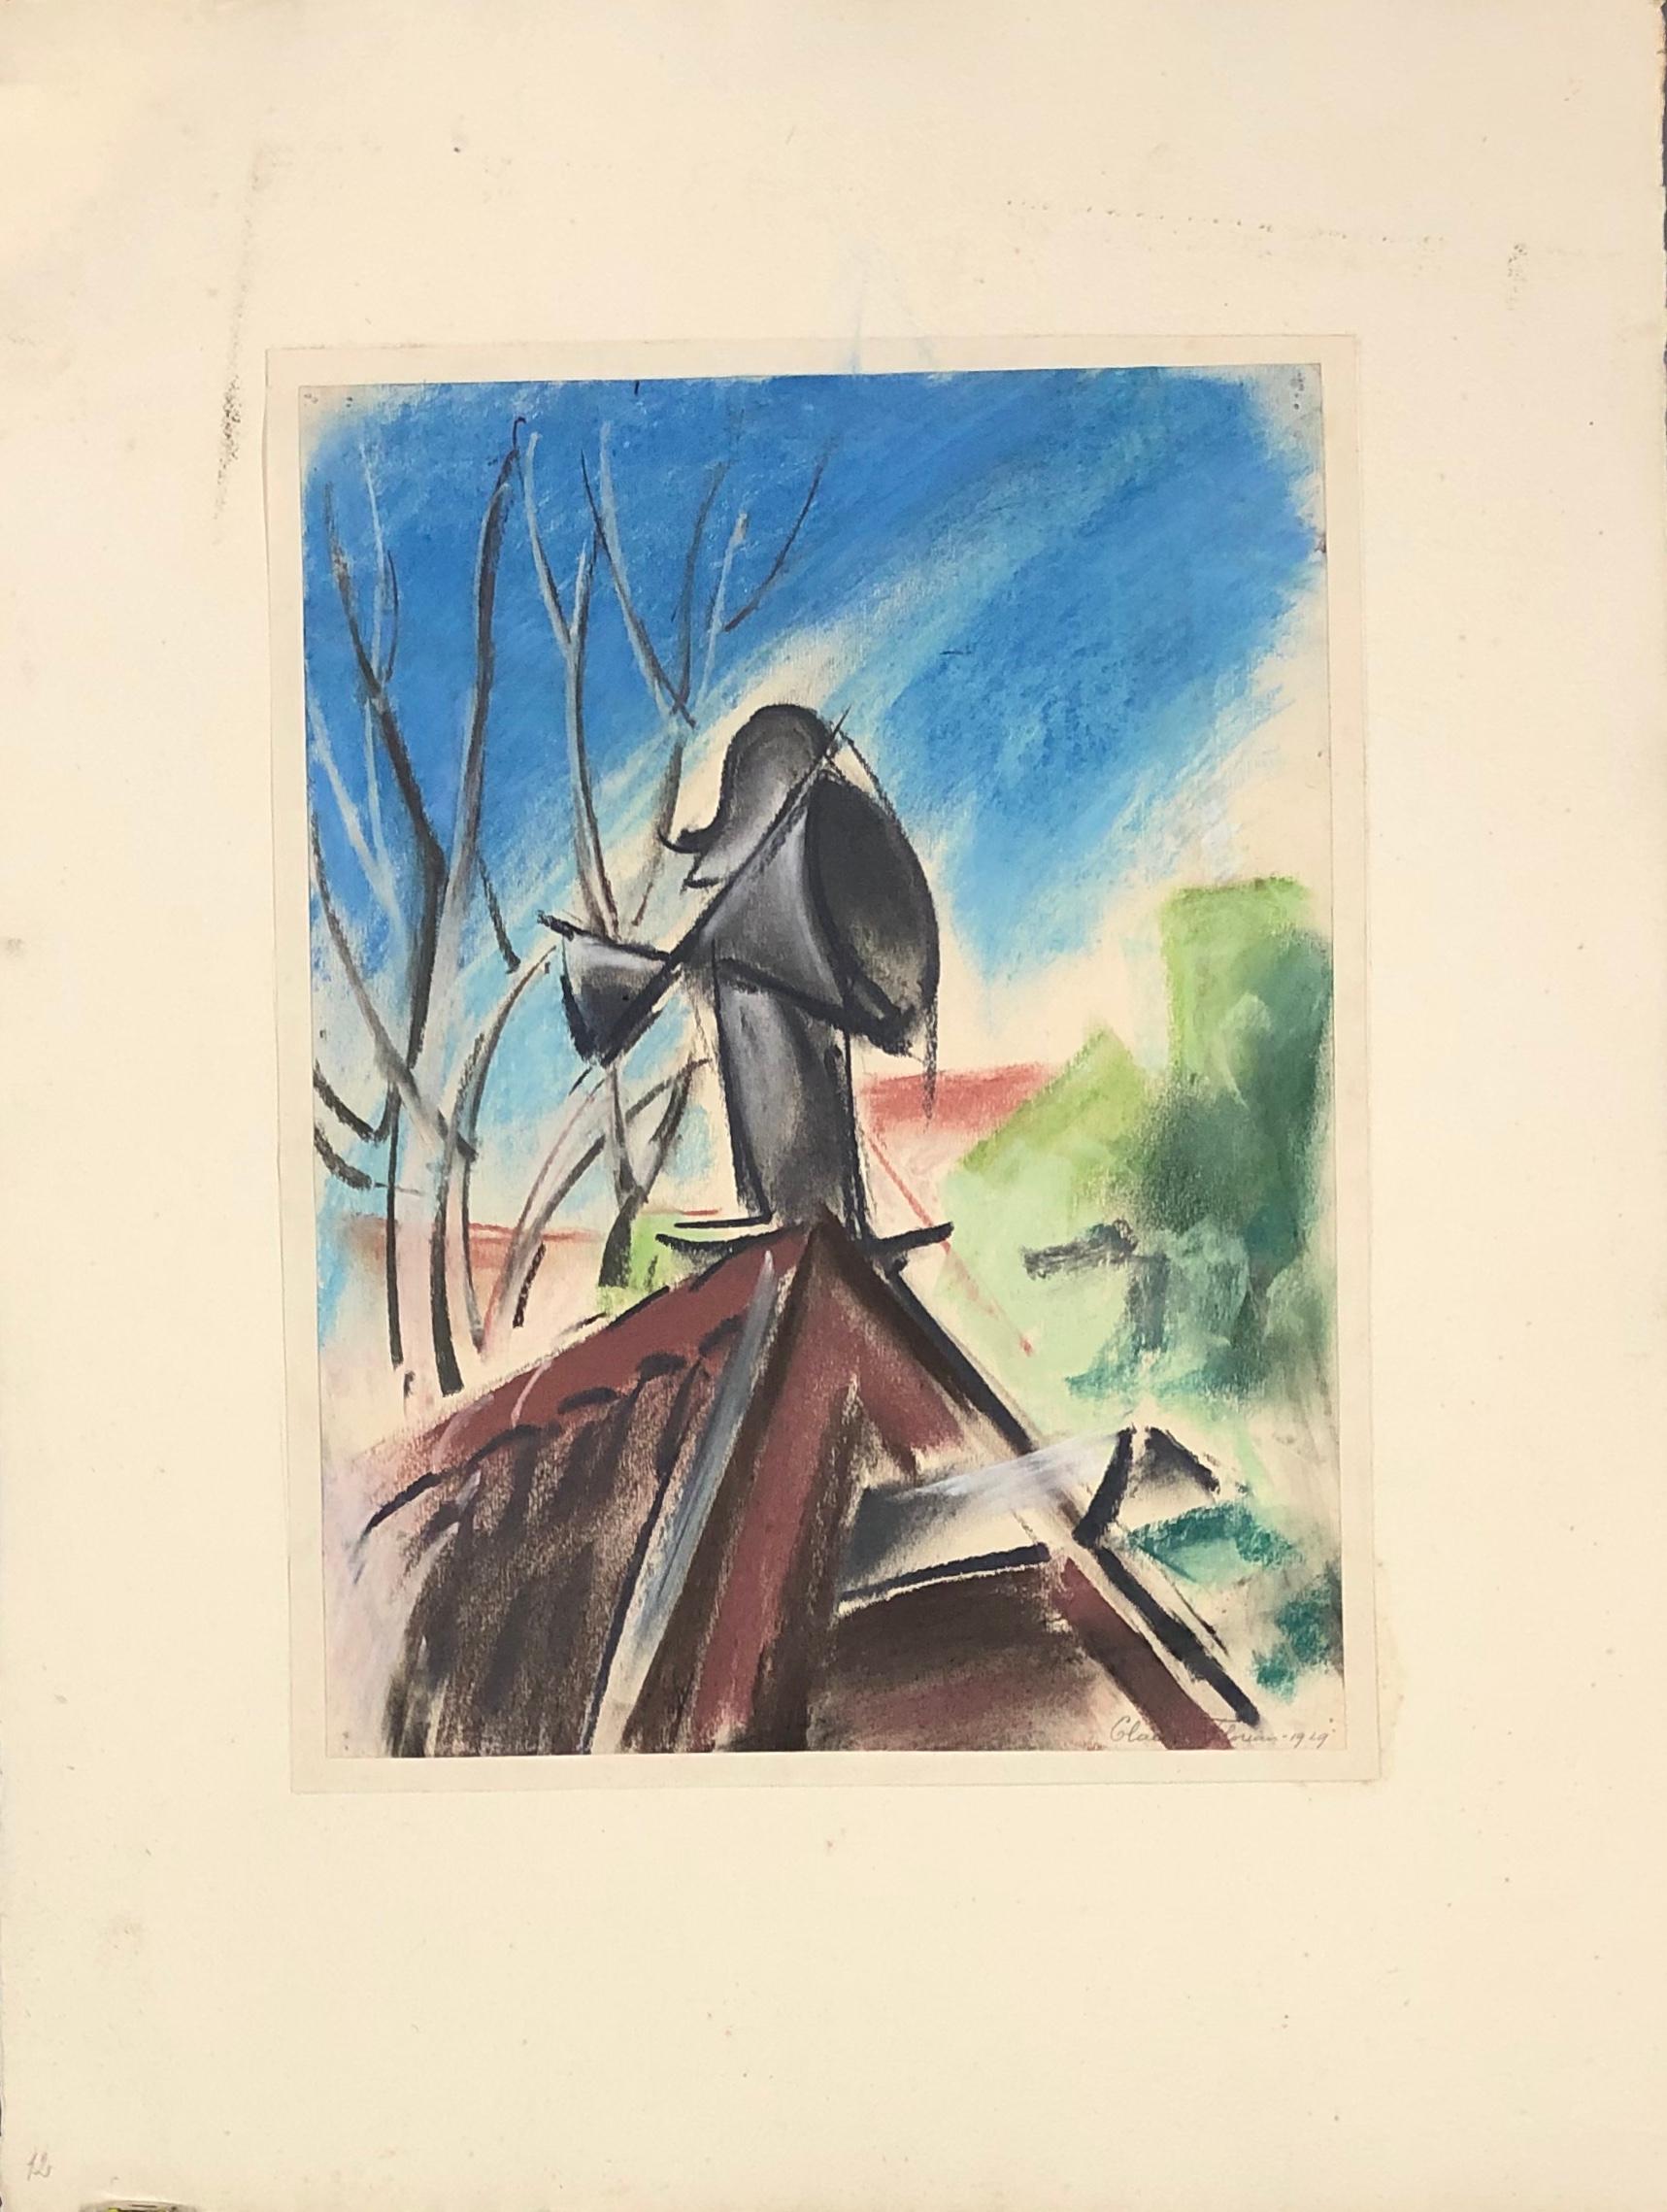 CLAES-THOBOIS Albert. Roof view. Pastel. Signed and dated 1929. - Art by Albert Claes-Thobois